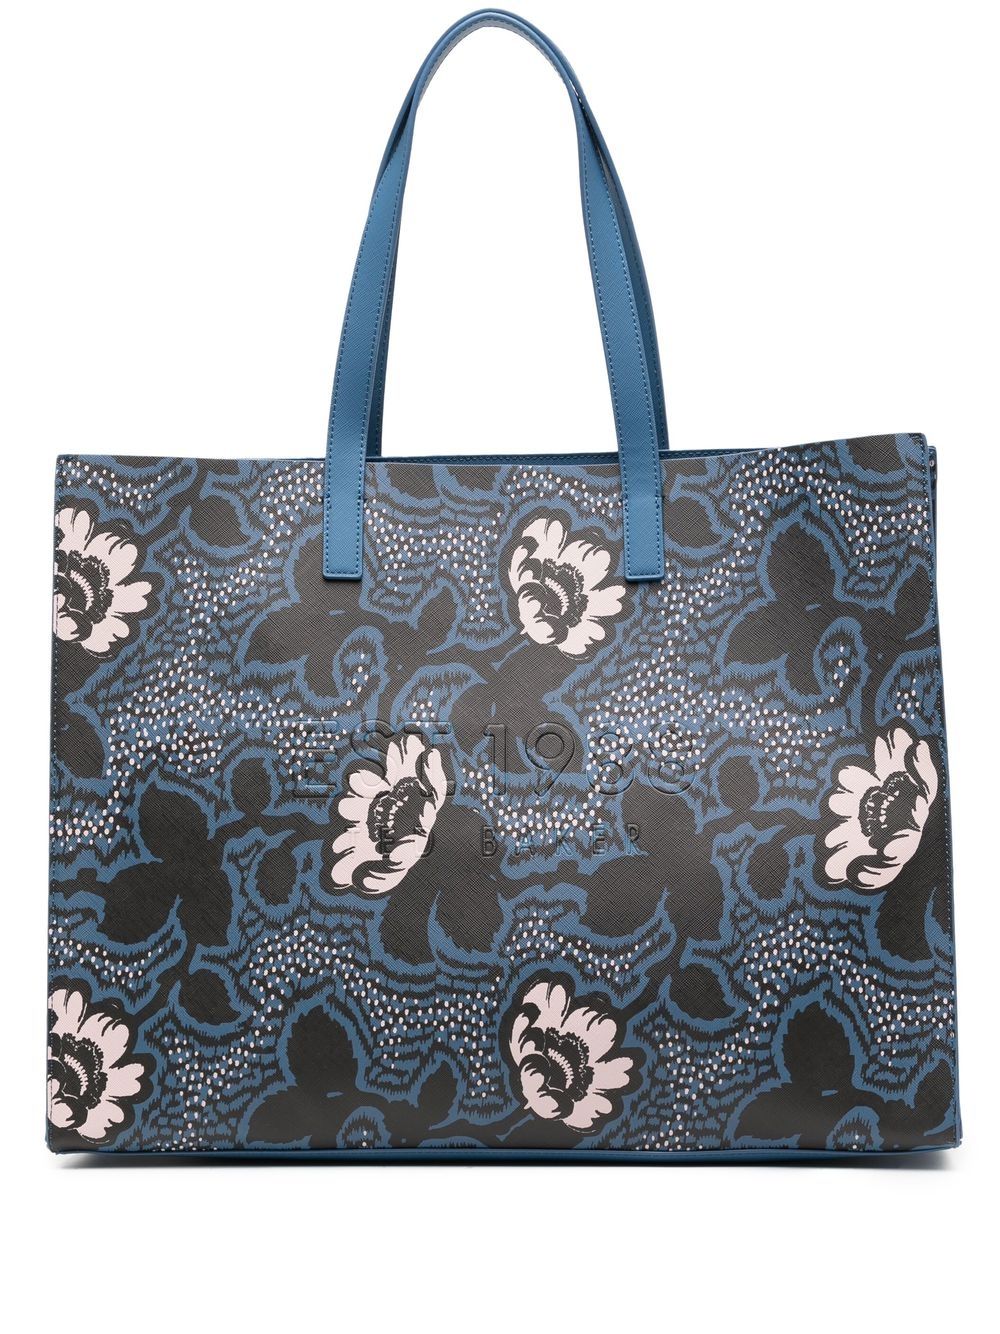 Ted Baker Blue Floral Bags & Handbags for Women for sale